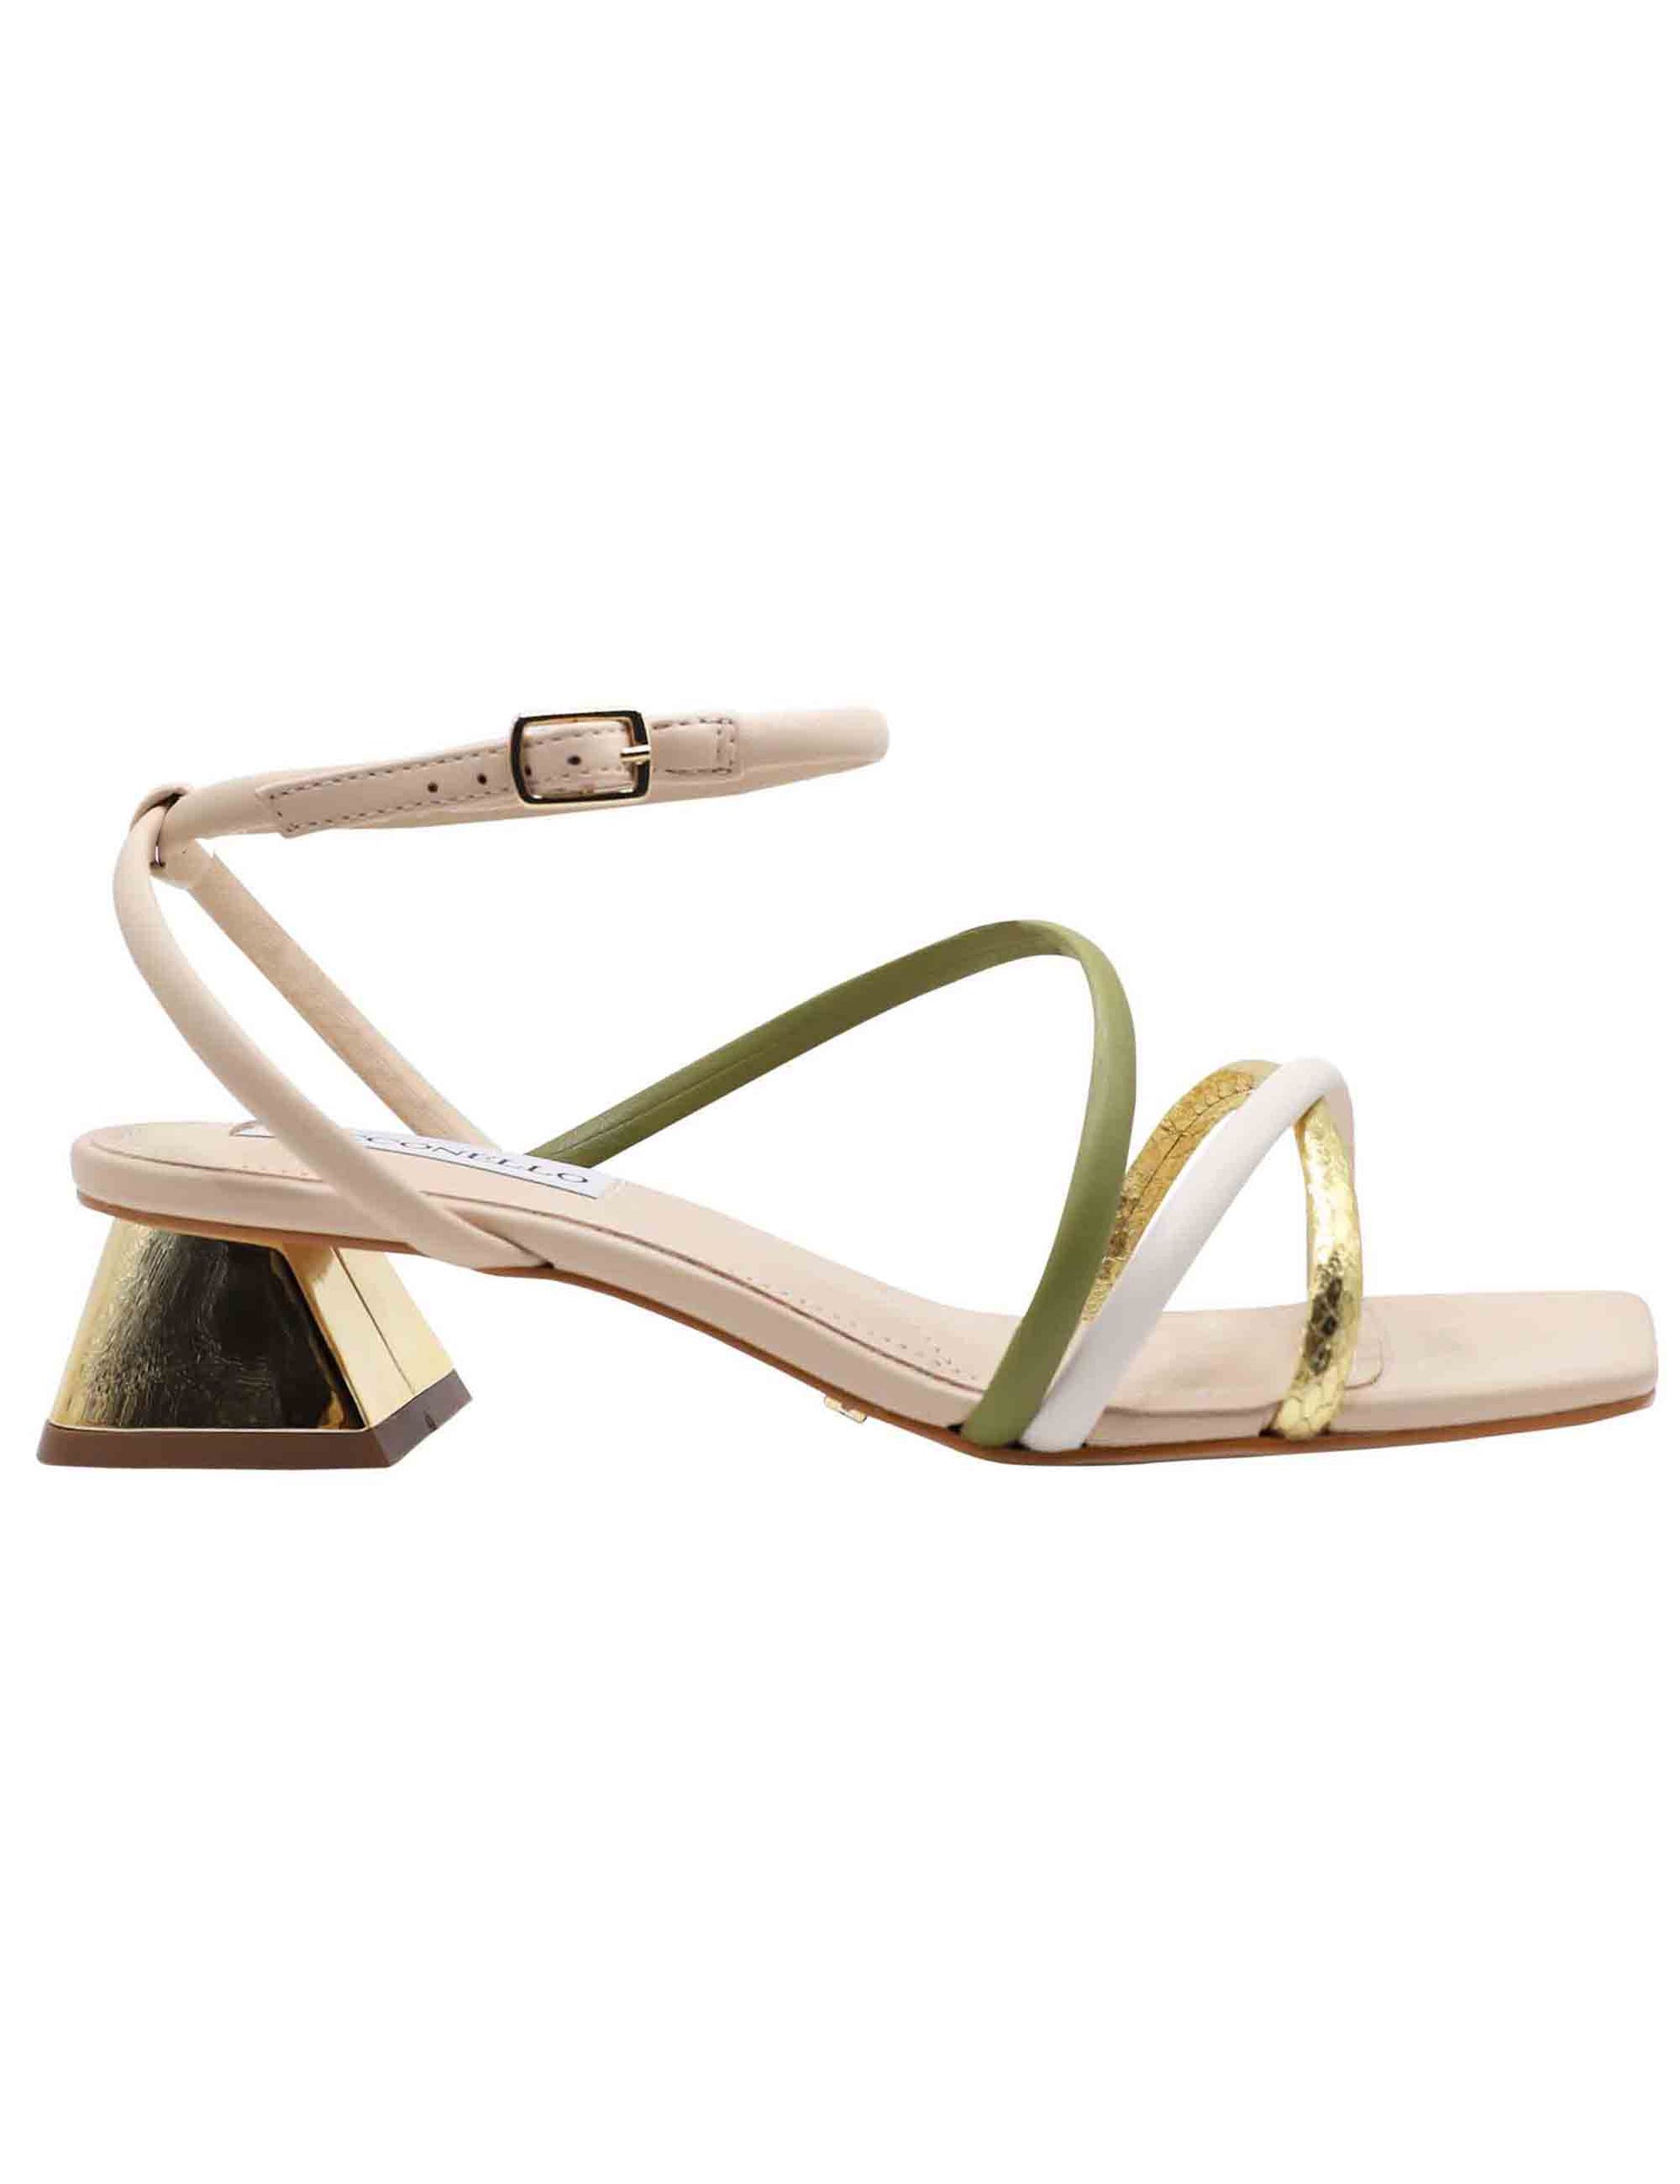 Women's beige leather sandals with double crossover ankle strap and jewel heel